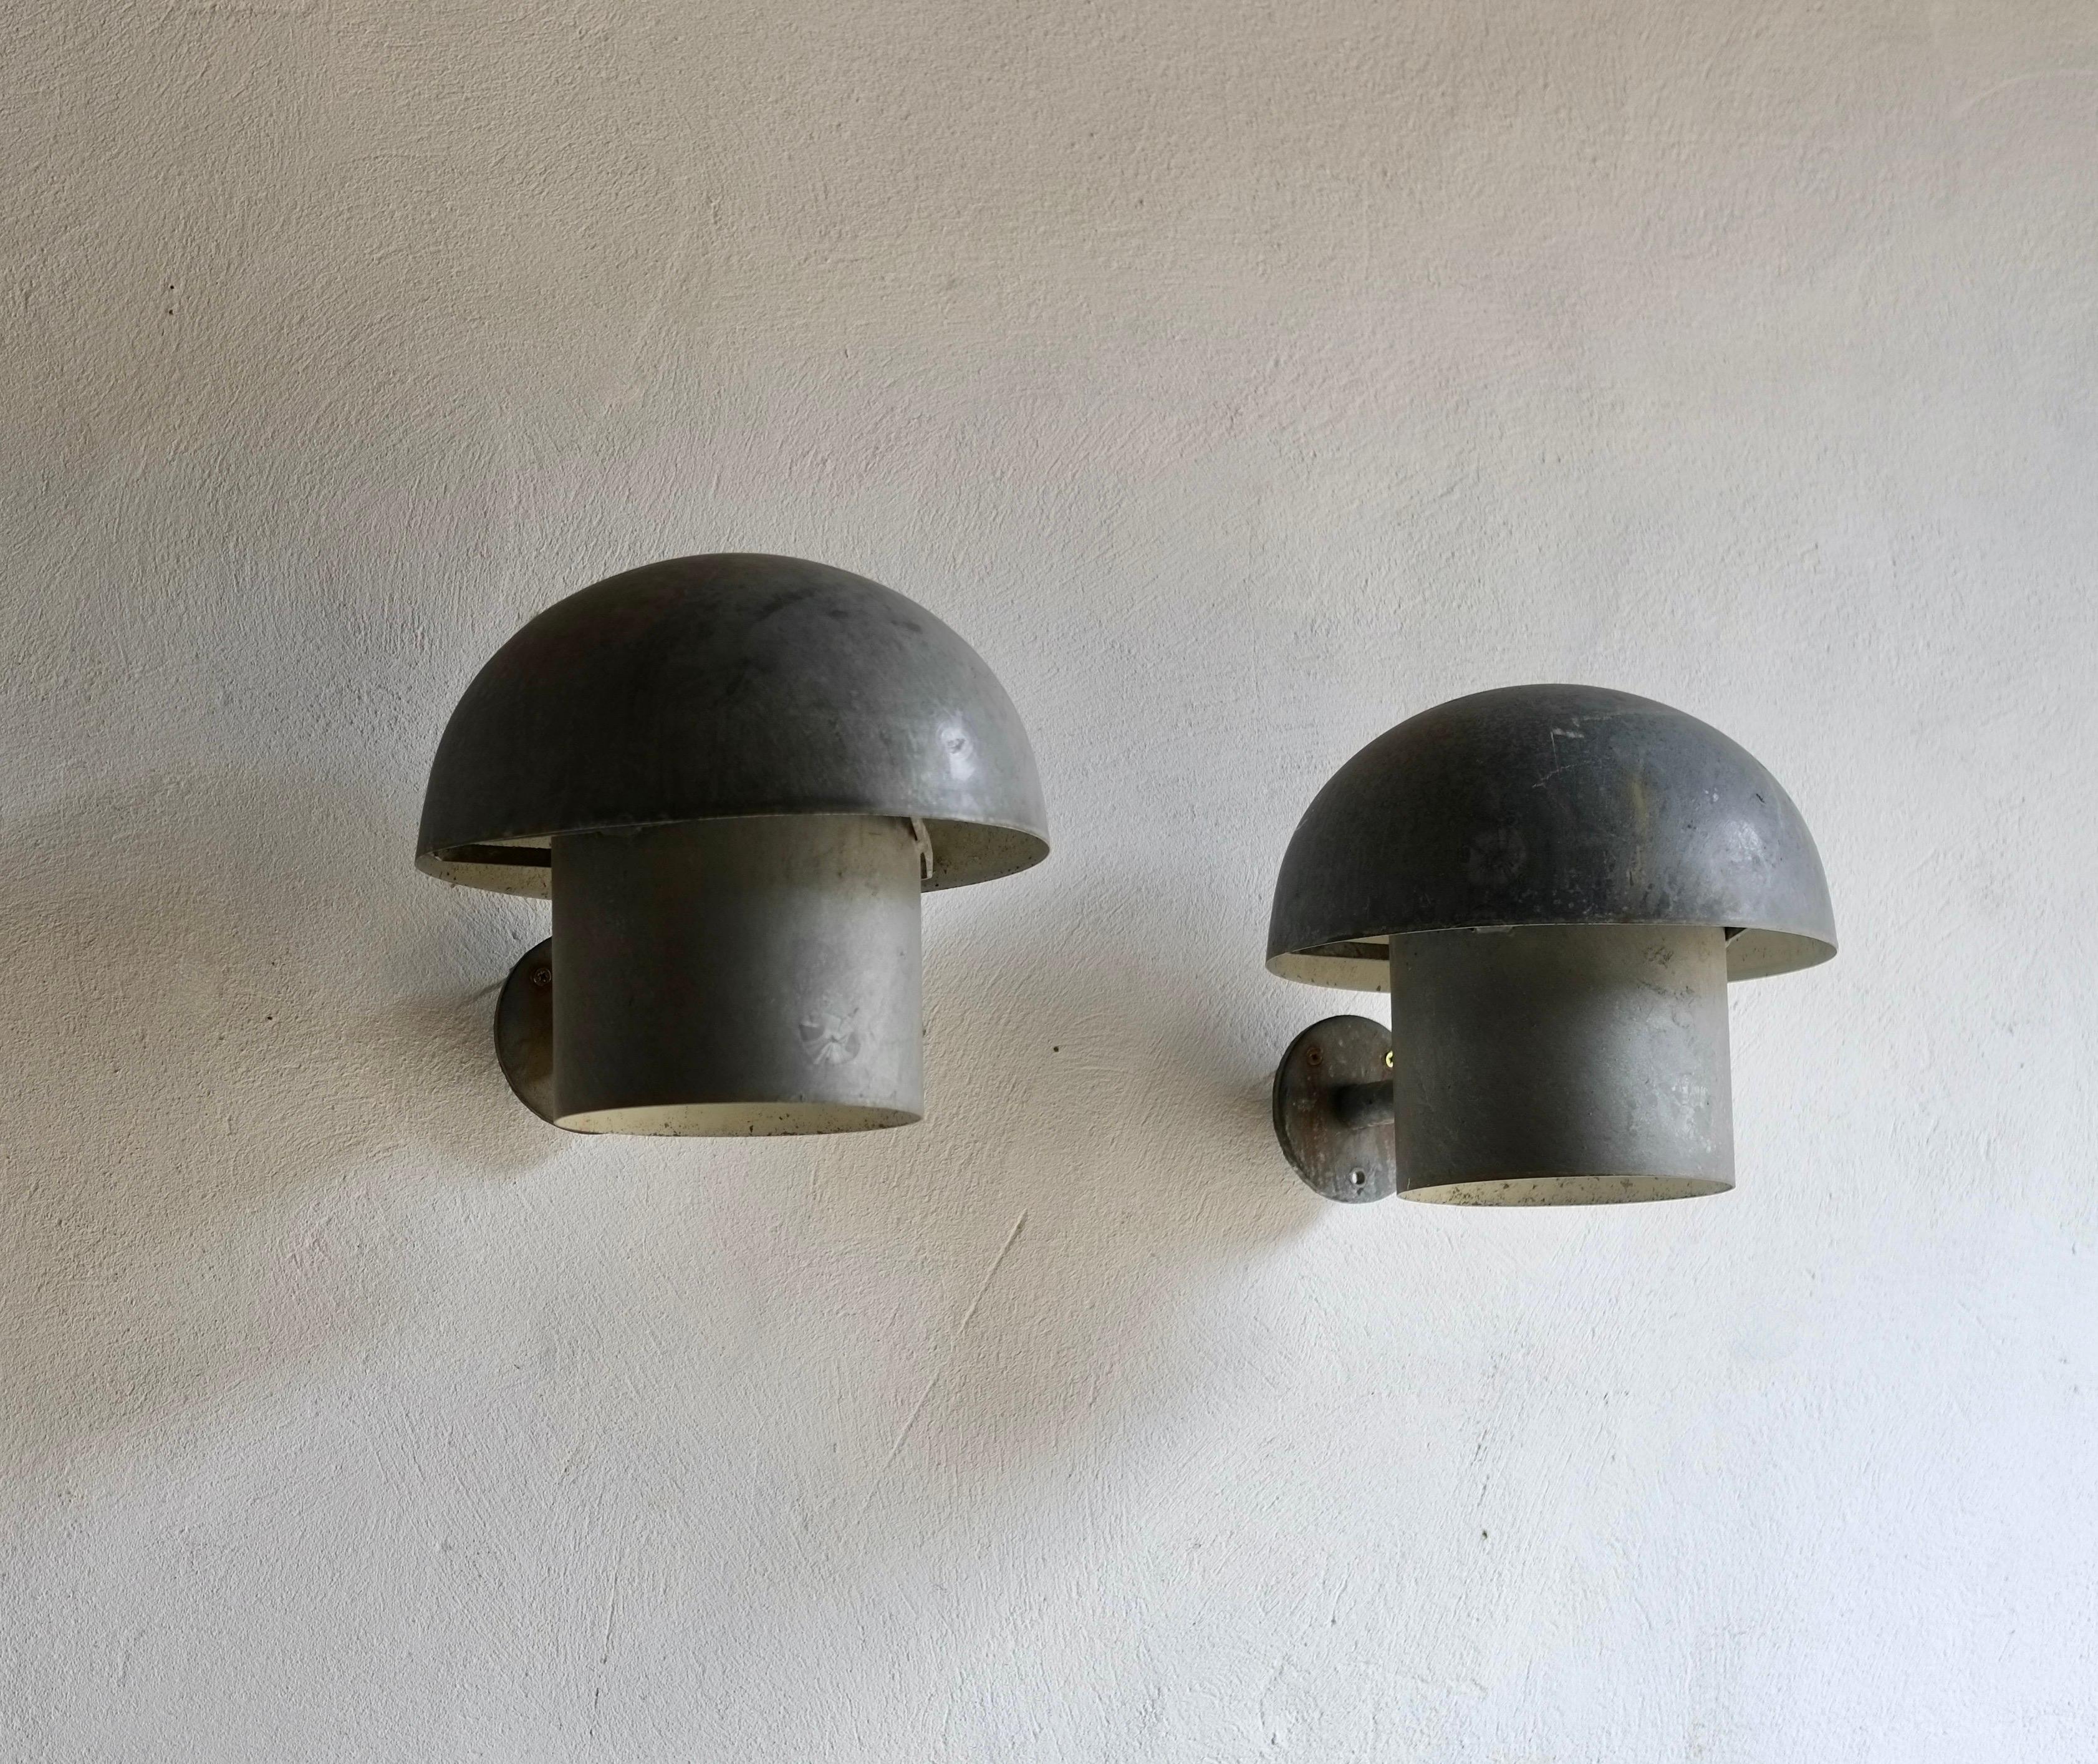 A pair of zinc-plated metal wall lights designed by Bjarne Bech for Louis Poulsen, circa 1965, Denmark.

The lamps have been rewired and PAT tested. They will need to be fitted by a professional and set into the wall.

Price is for the pair.